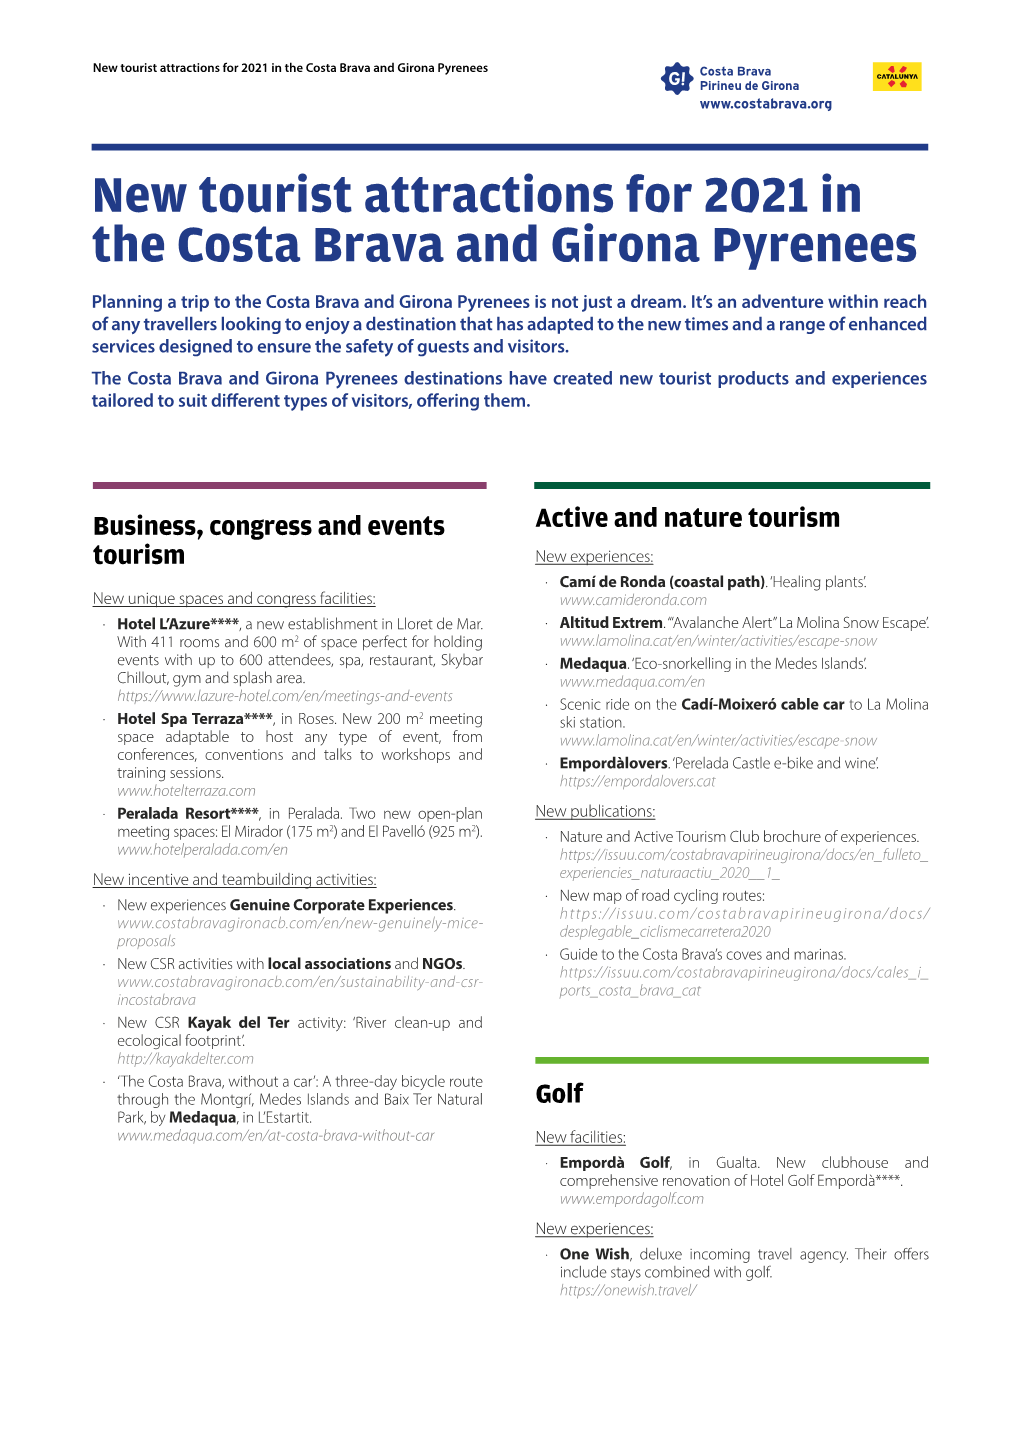 New Tourist Attractions for 2021 in the Costa Brava and Girona Pyrenees